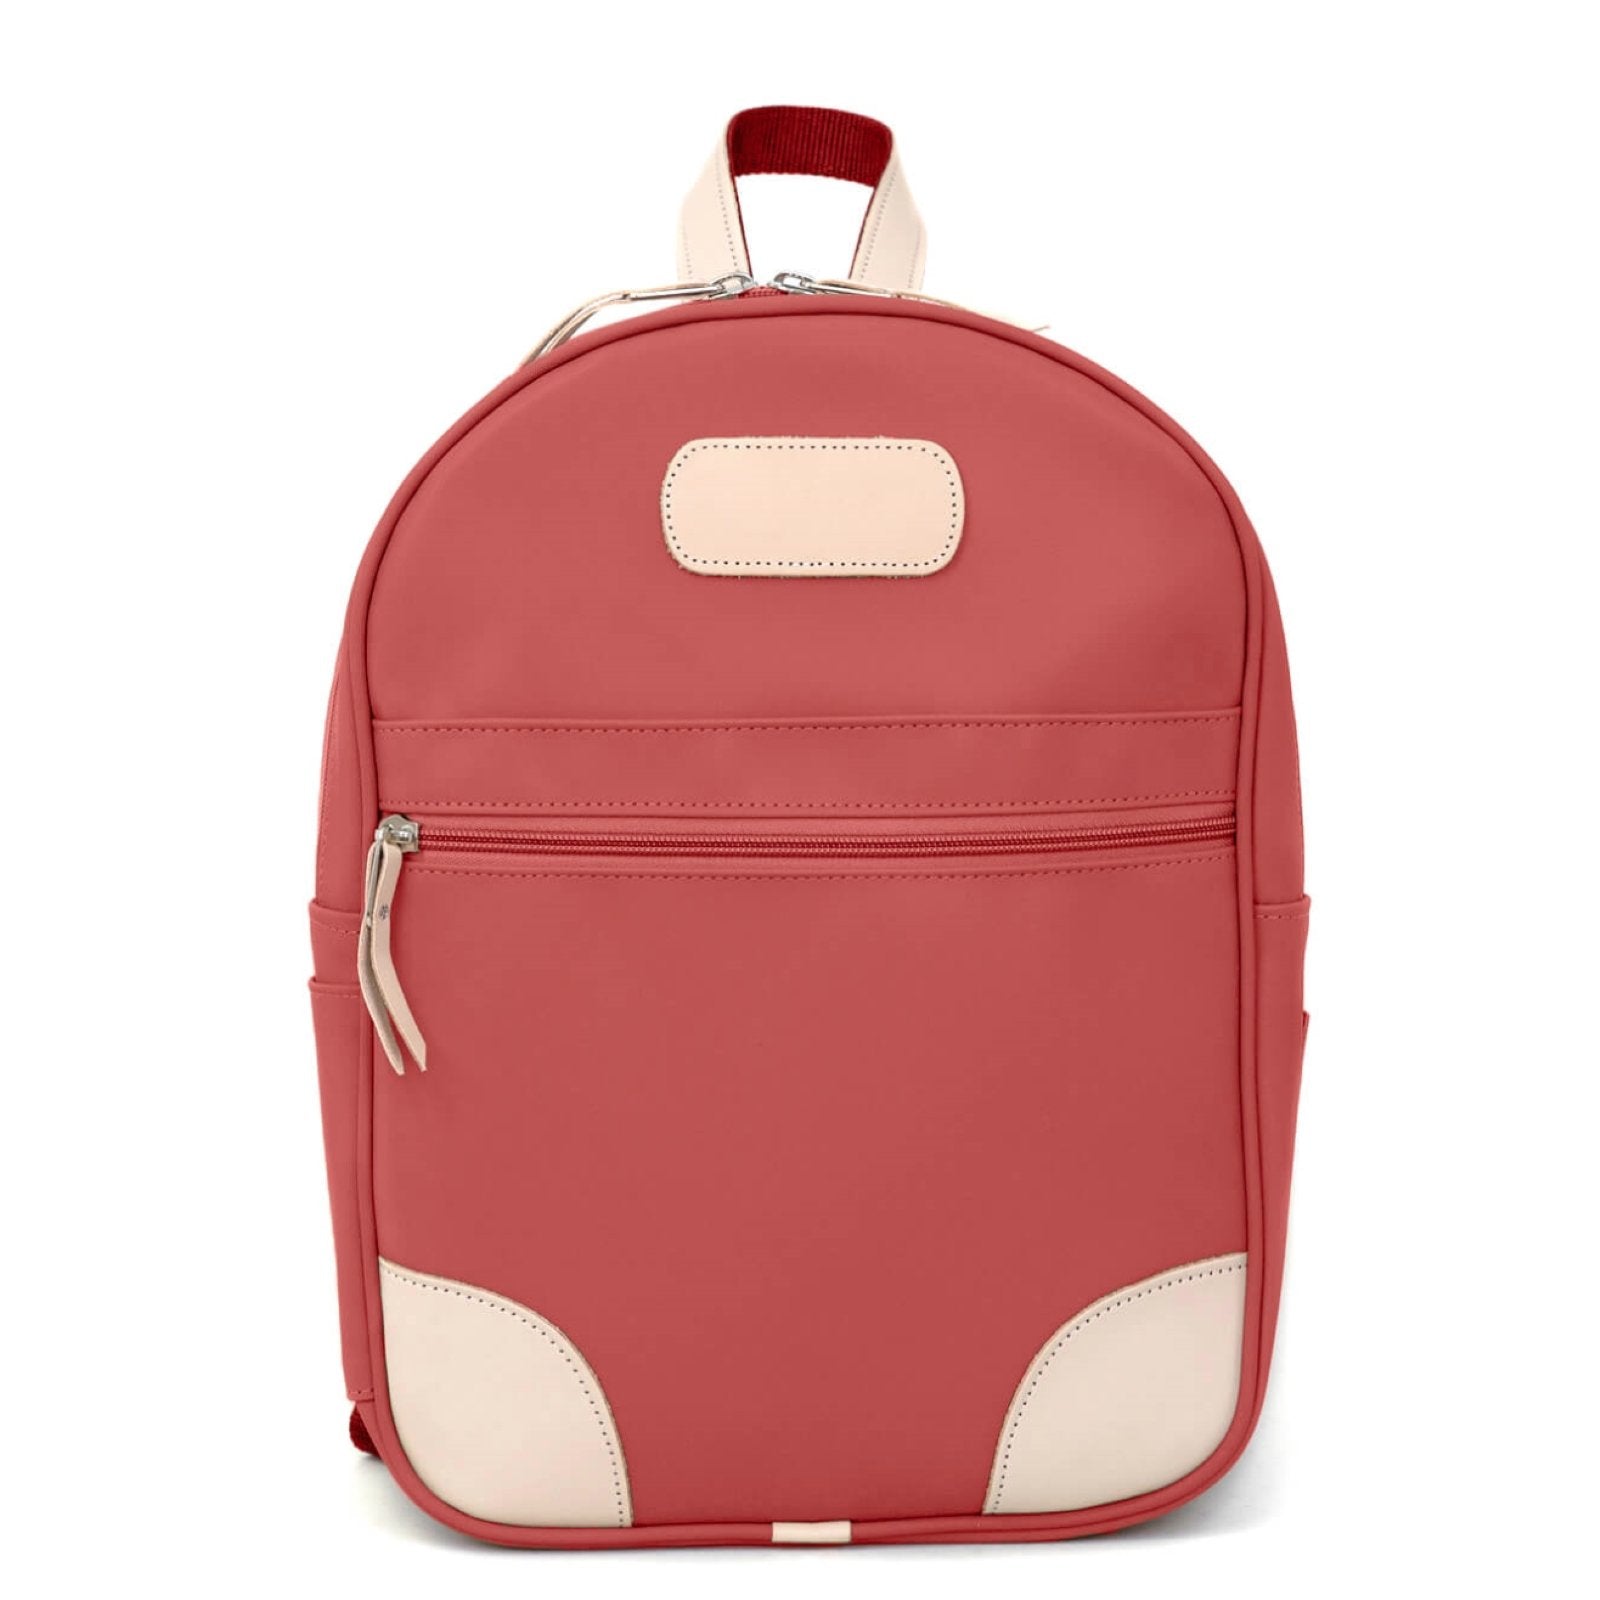 Backpack (Order in any color!) Backpacks Jon Hart Coral Coated Canvas  